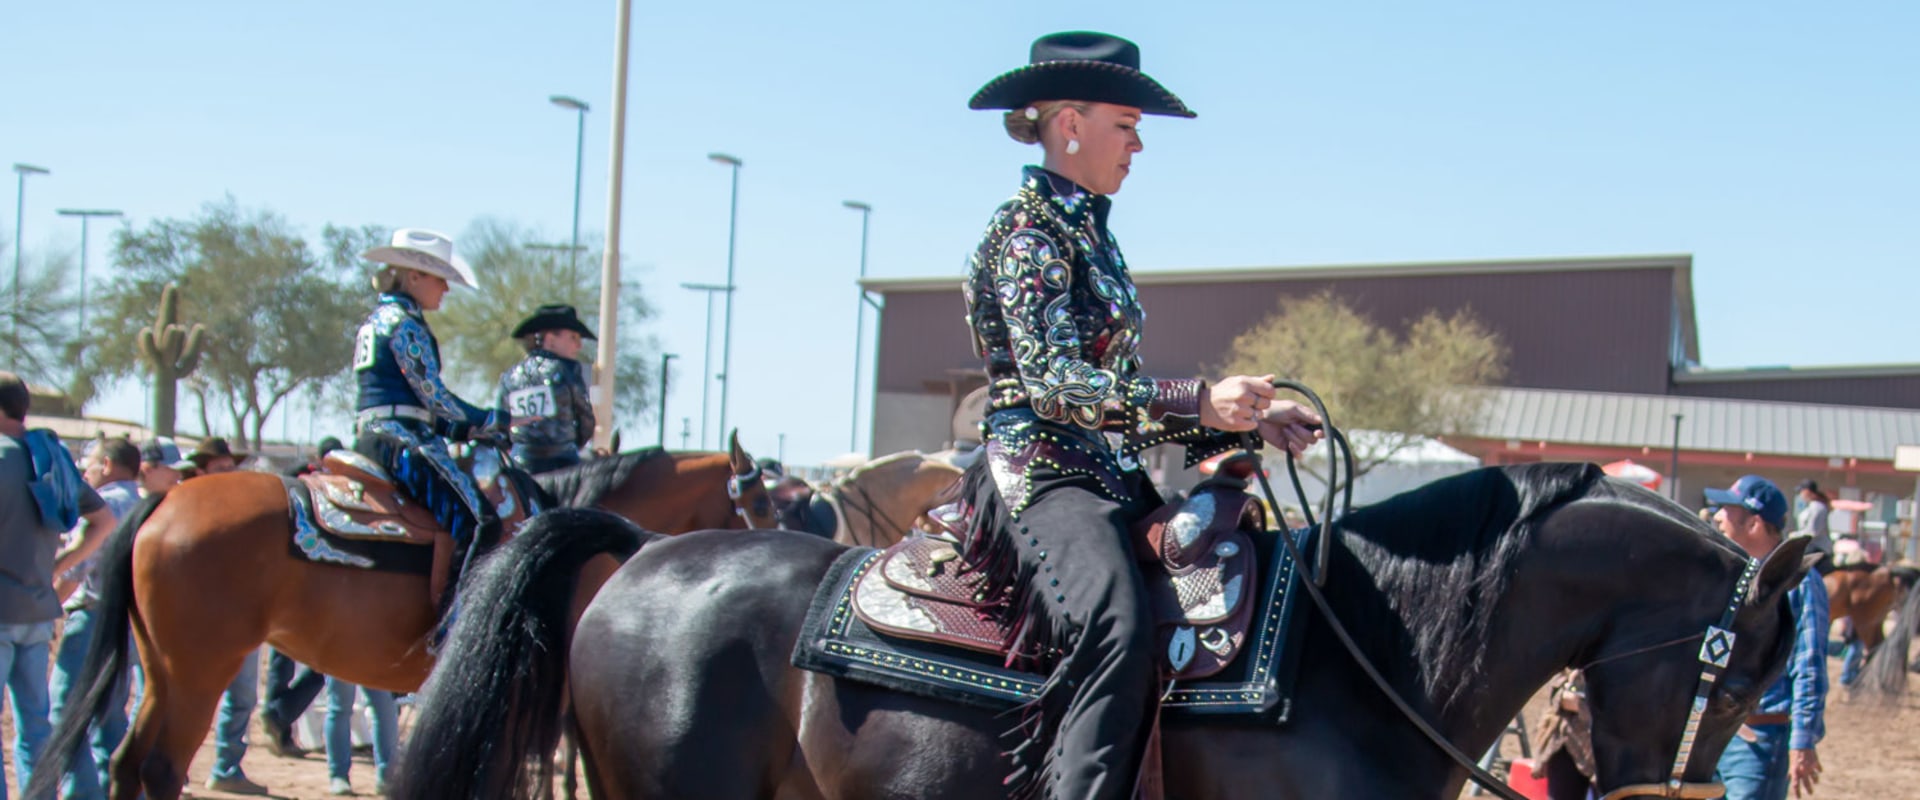 Discover the Best Horse Shows in Scottsdale, Arizona